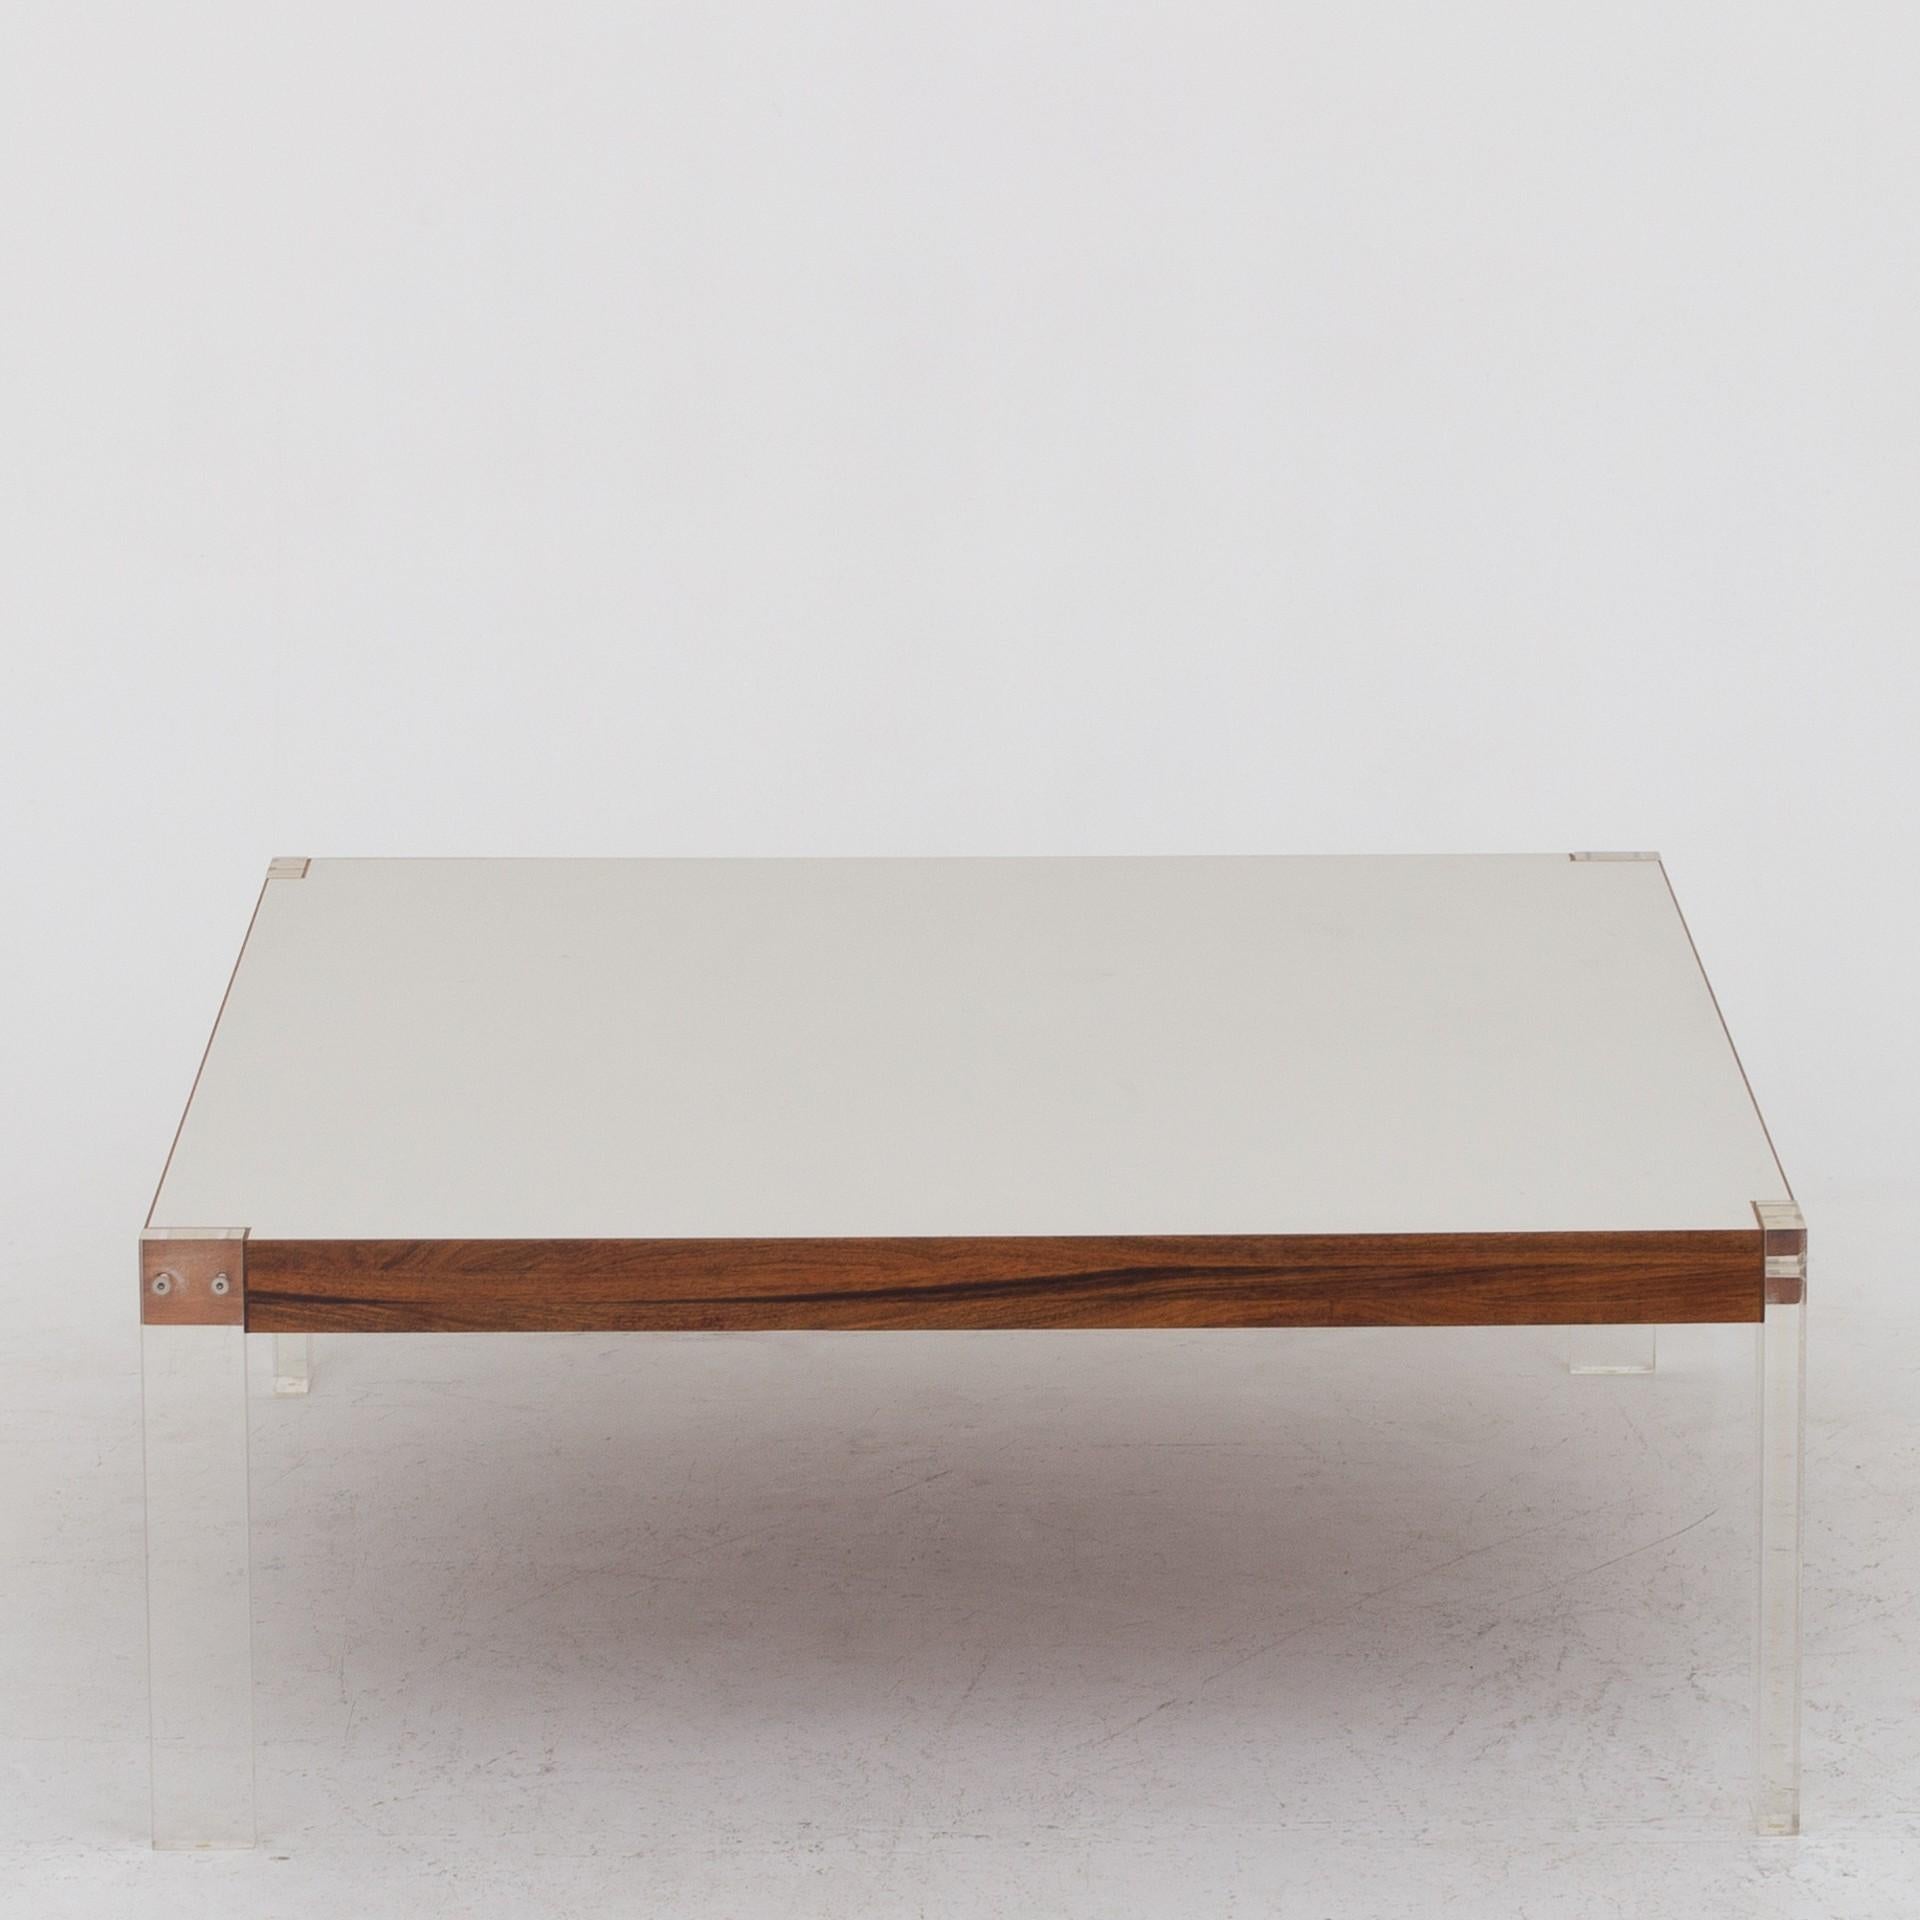 20th Century Coffee Table in Rosewood by Poul Nørreklit